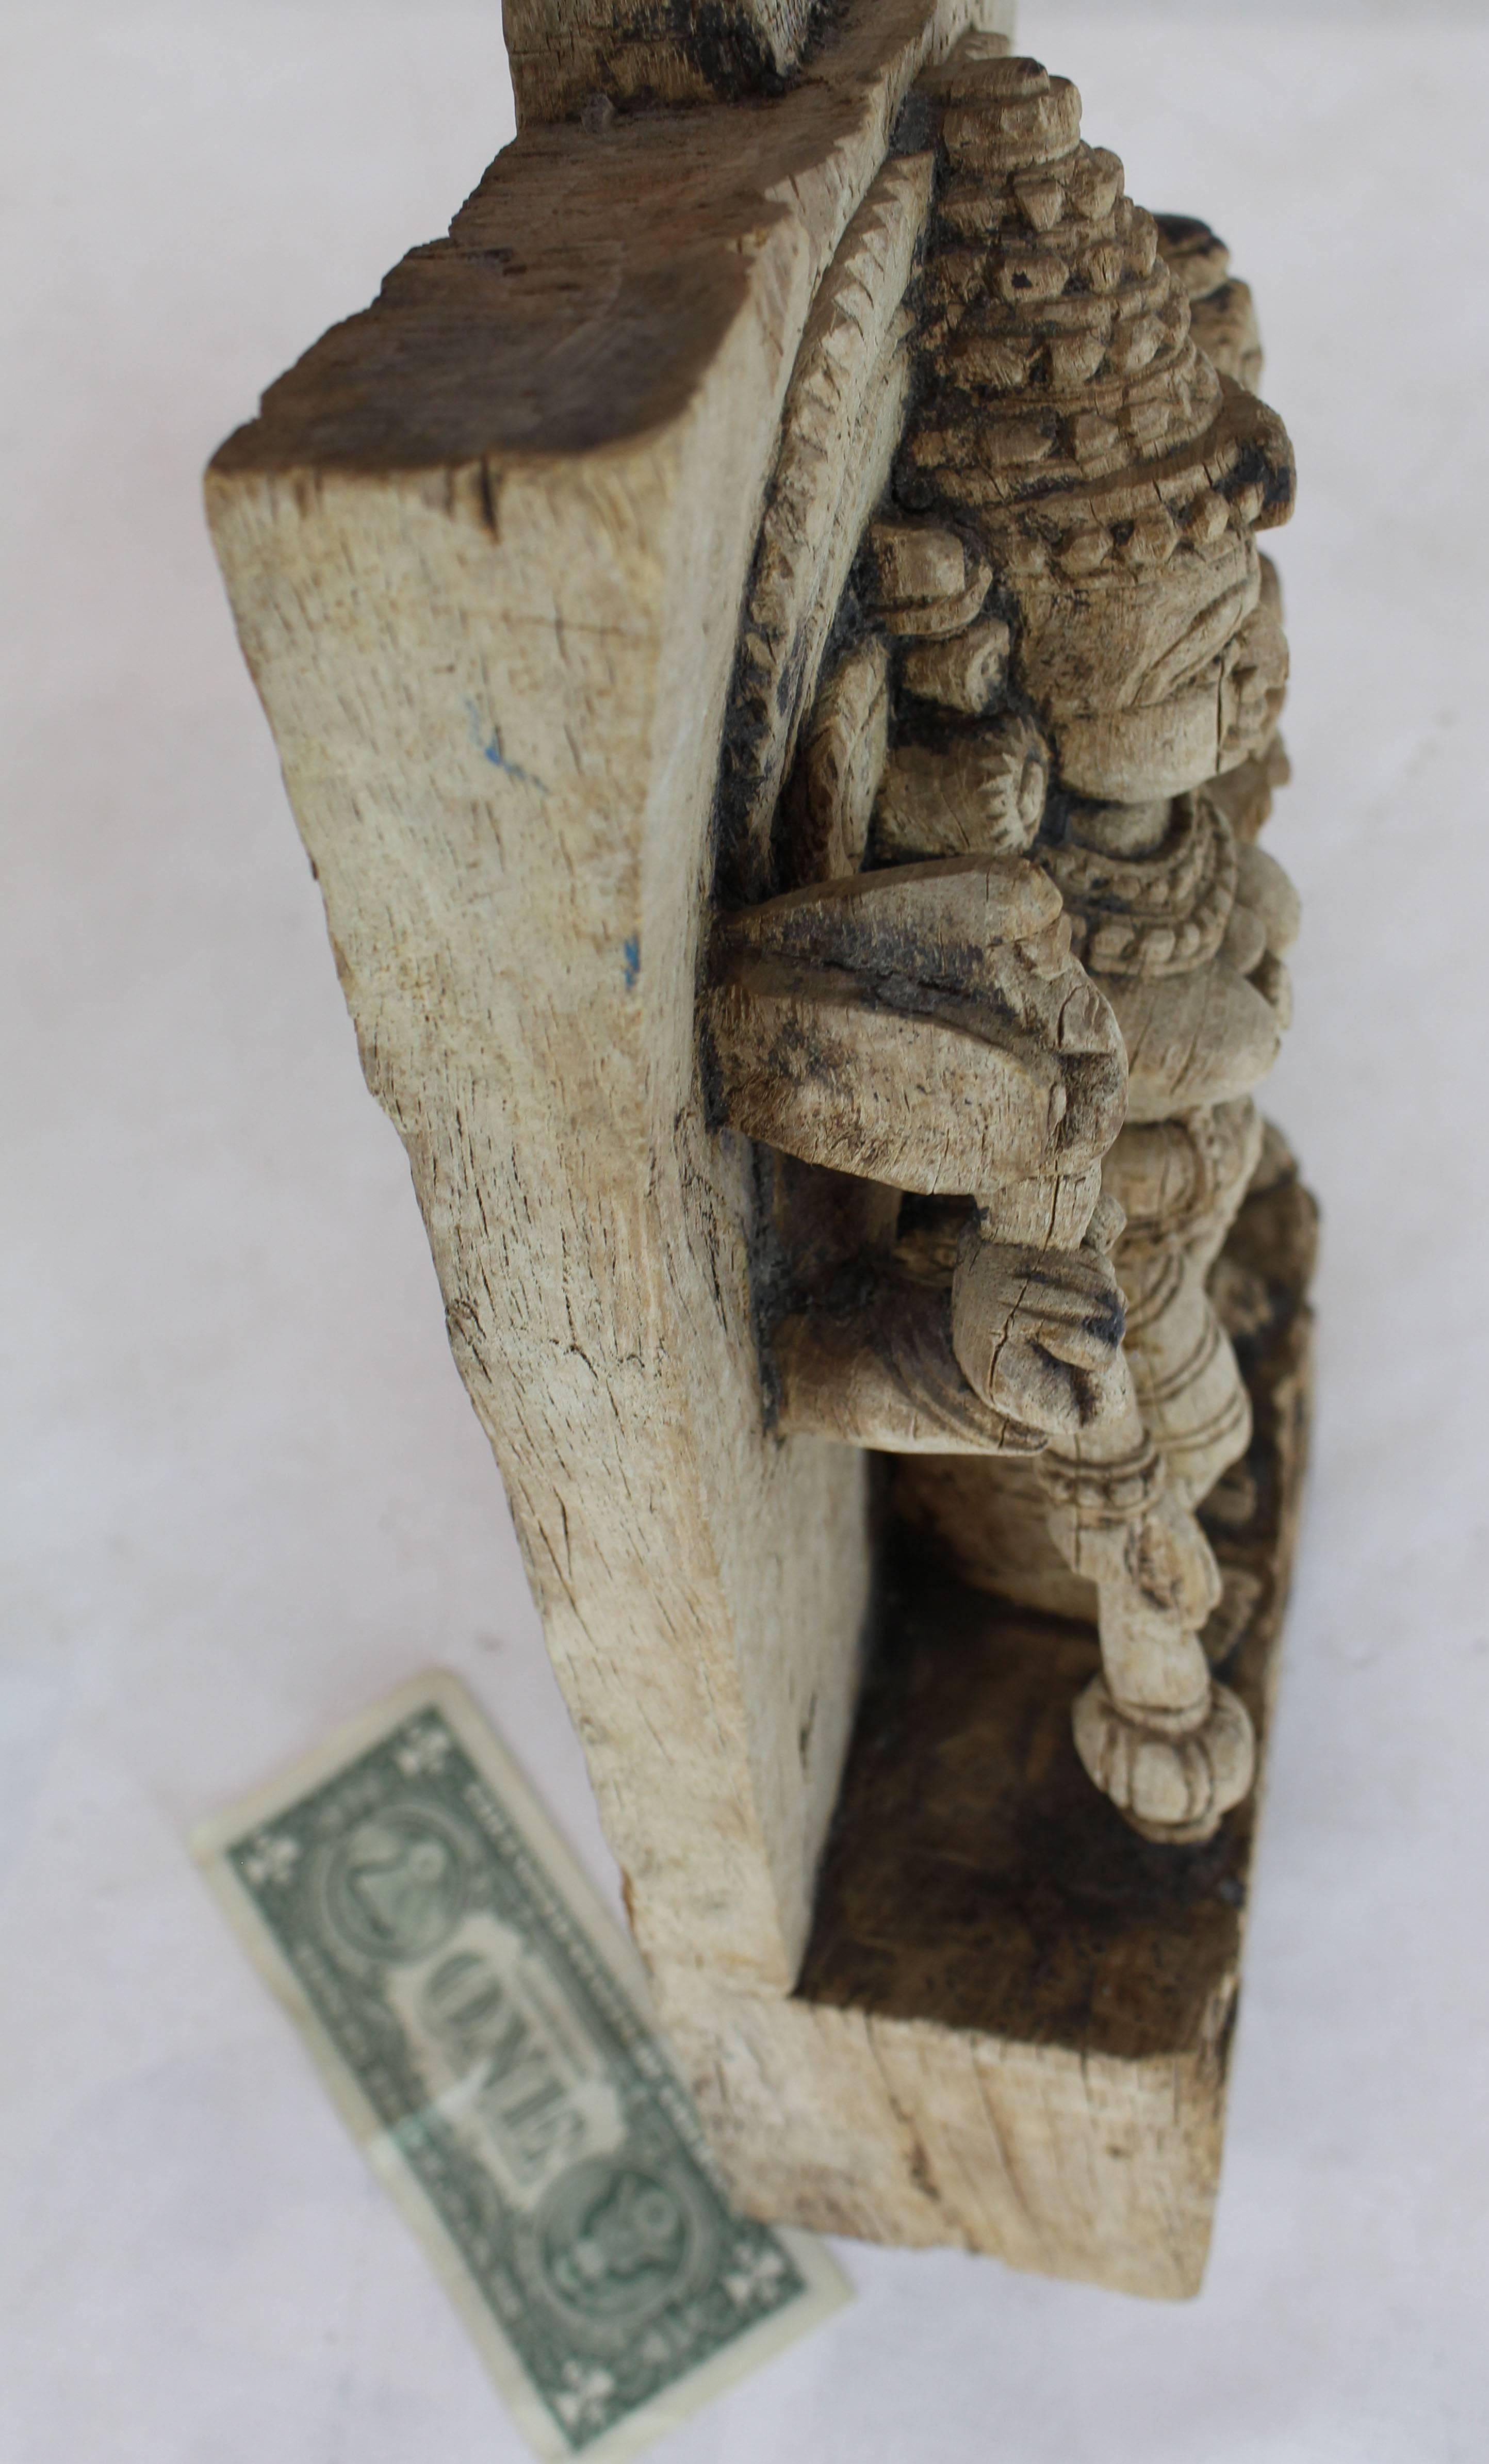 Very old antique Indian Goddess wall sculpture. Heavily hand-carved piece. The wood is very hard feels nearly petrofied. Nice patina and aging details.